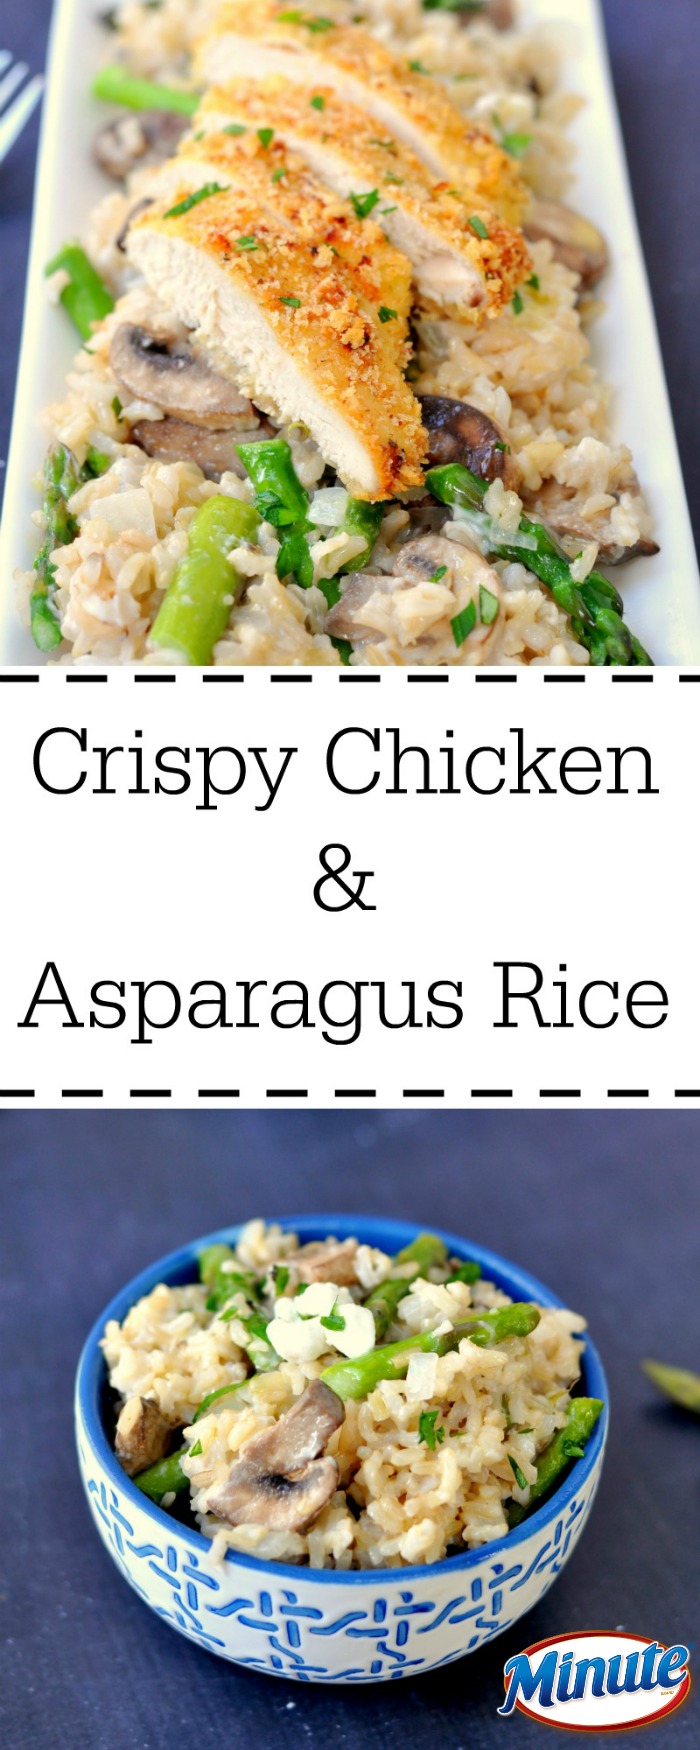 Crispy Chicken with Asparagus Goat Cheese Rice